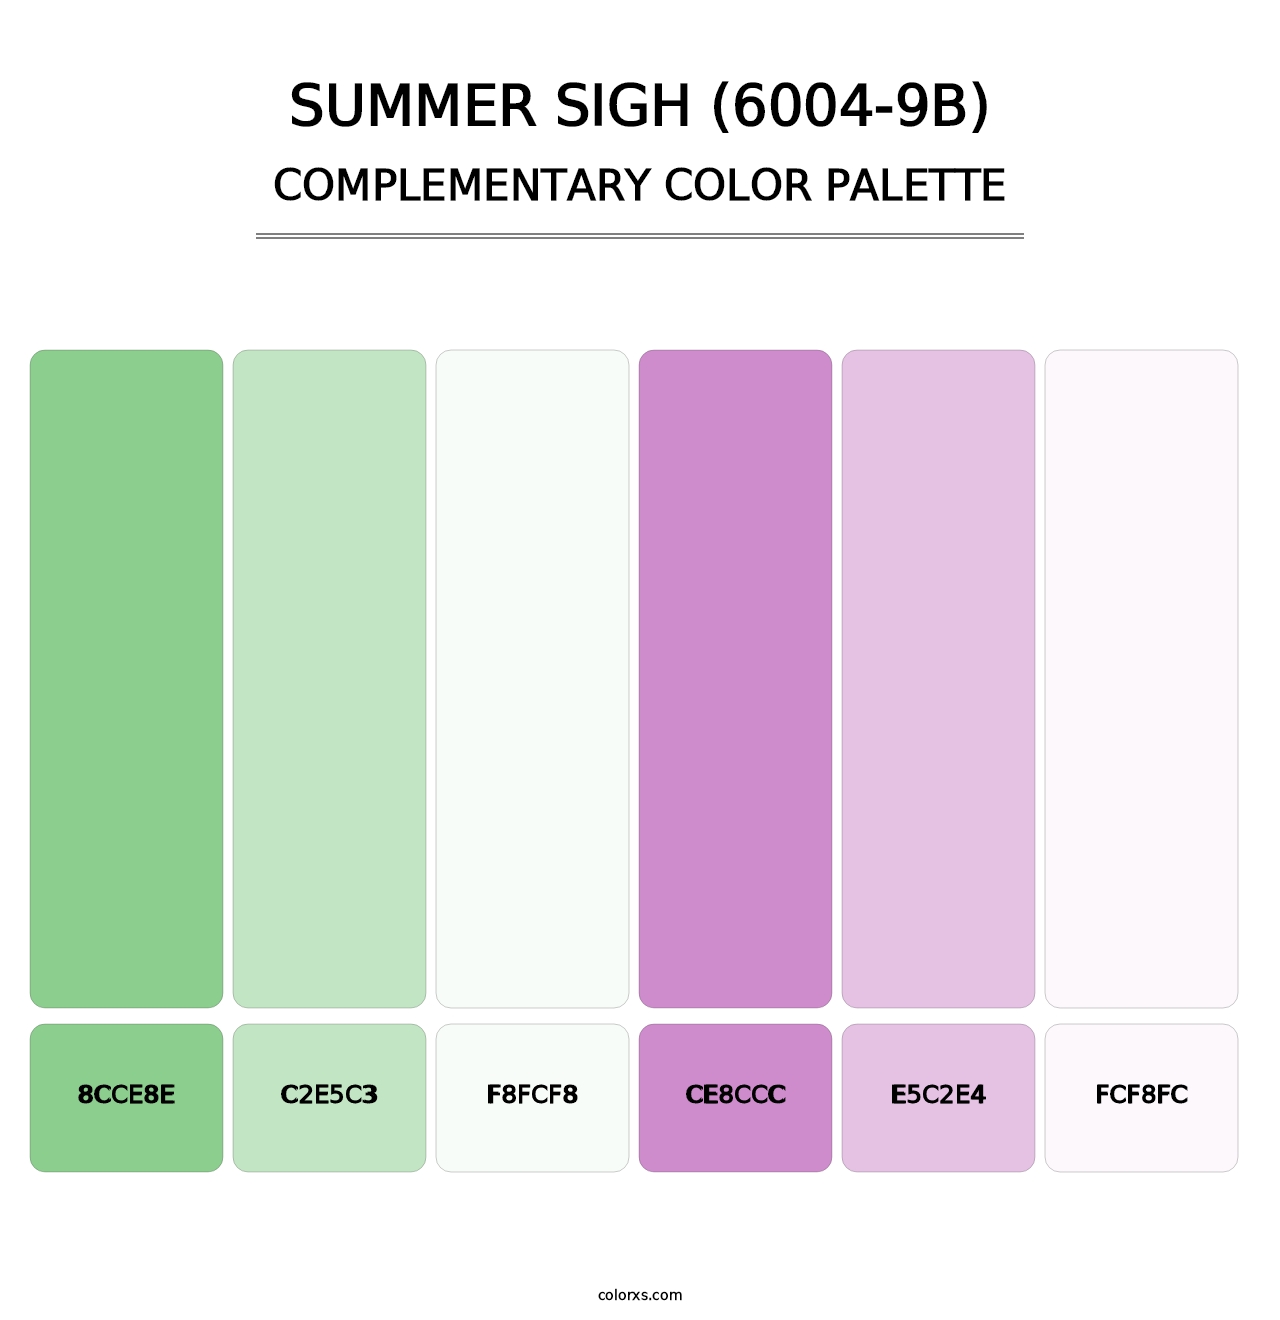 Summer Sigh (6004-9B) - Complementary Color Palette